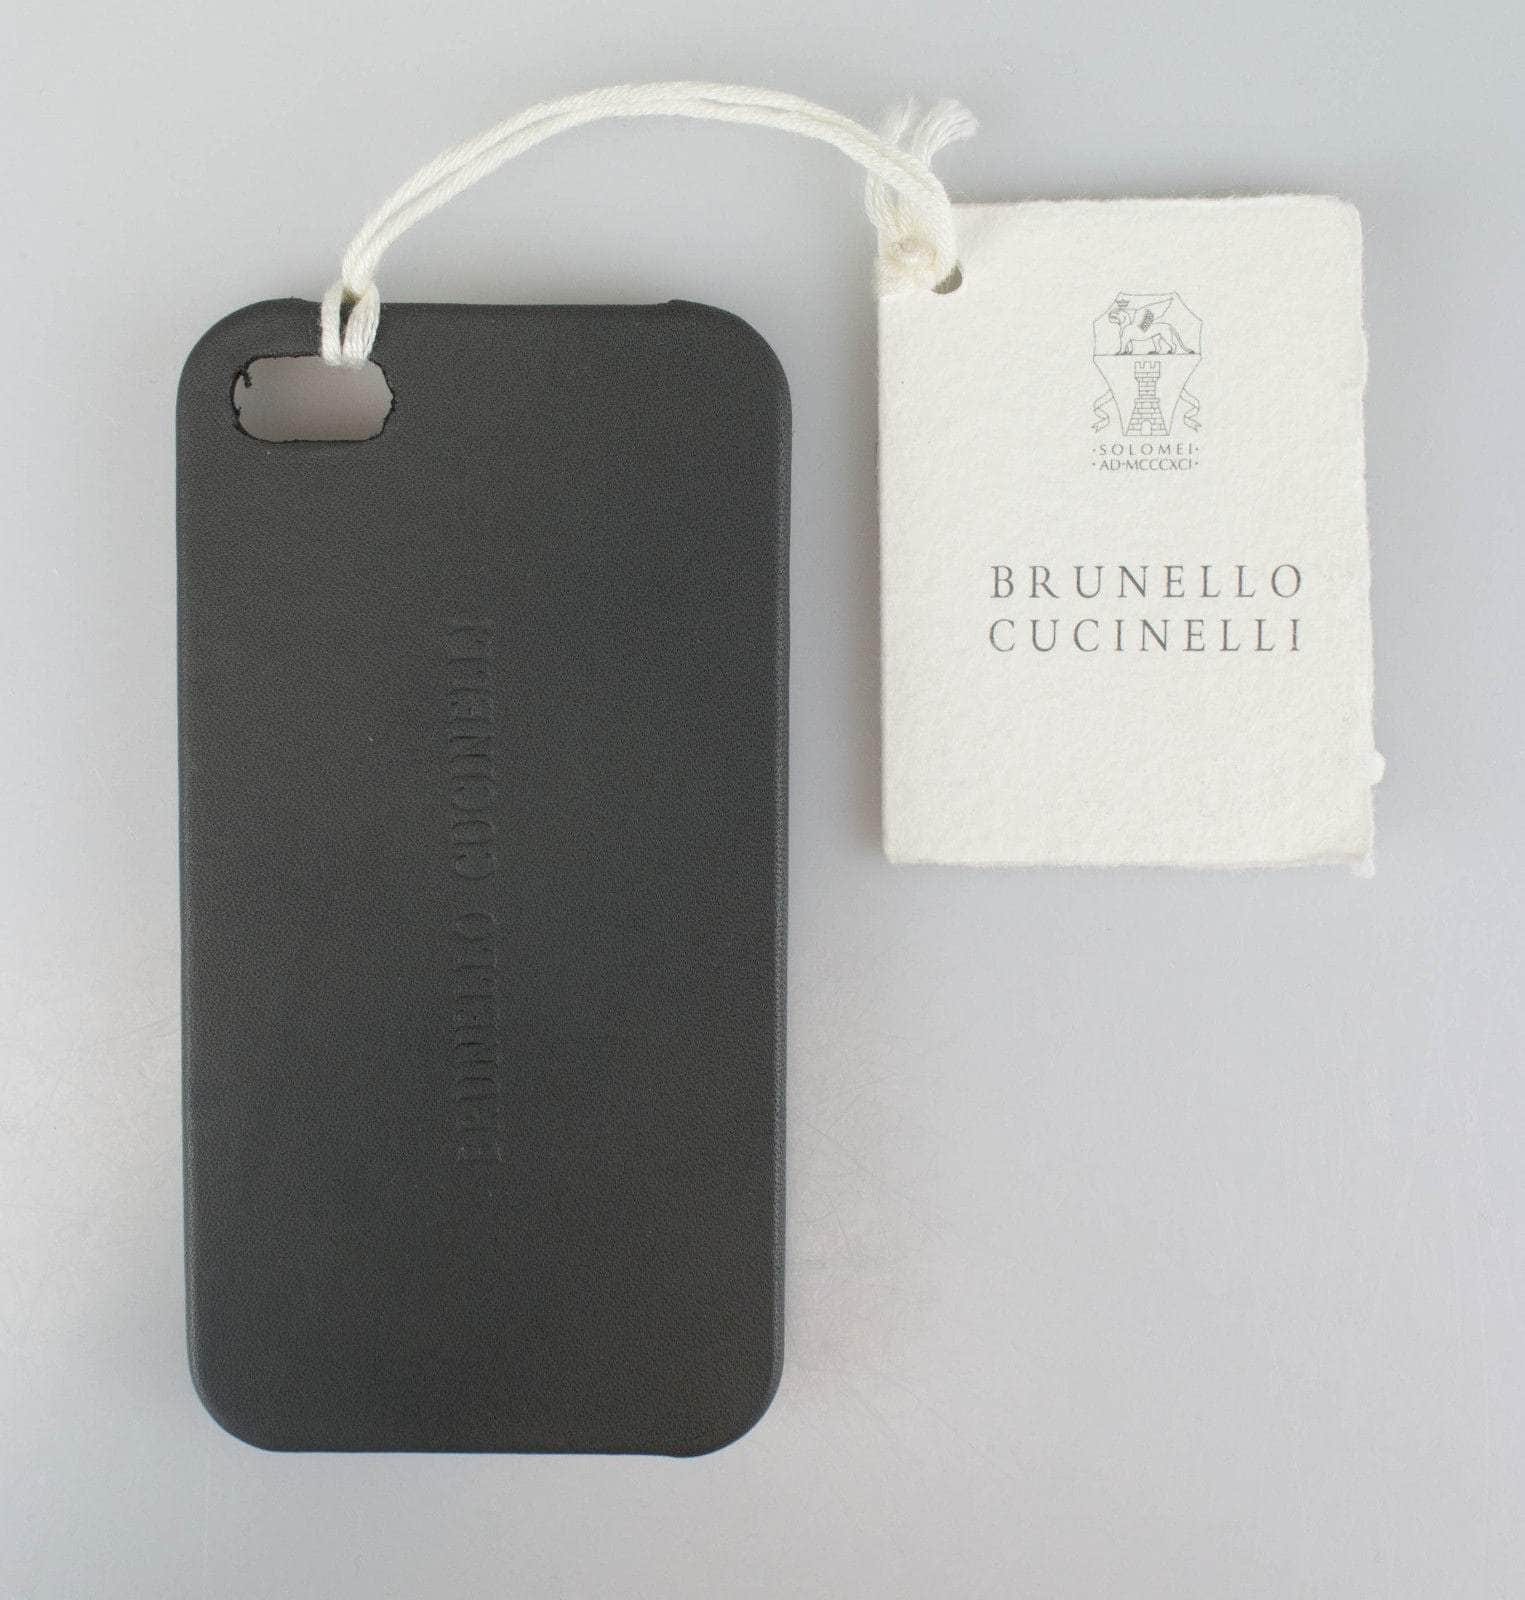 Brunello Cucinelli brunello-cucinelli, channelenable-all, chicmi, couponcollection, gender-mens, gender-womens, main-accessories, mens-shoes, size-os, under-250, unisex-phone-cases OS Ash Gray Leather Iphone Case JF1-410 JF1-410